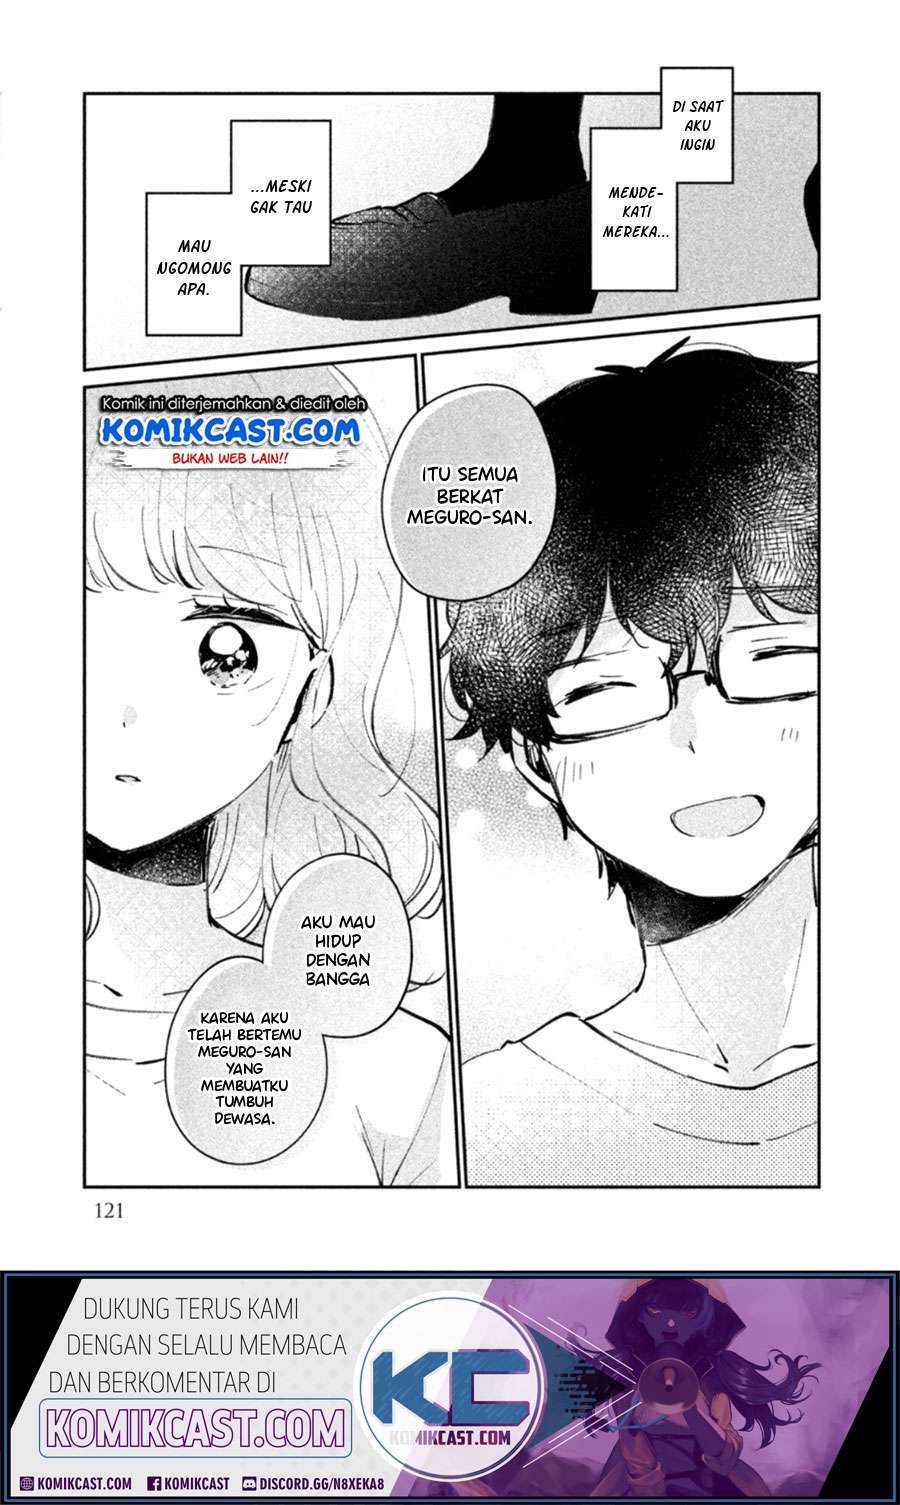 It'S Not Meguro-San'S First Time Chapter 24.5 - 135